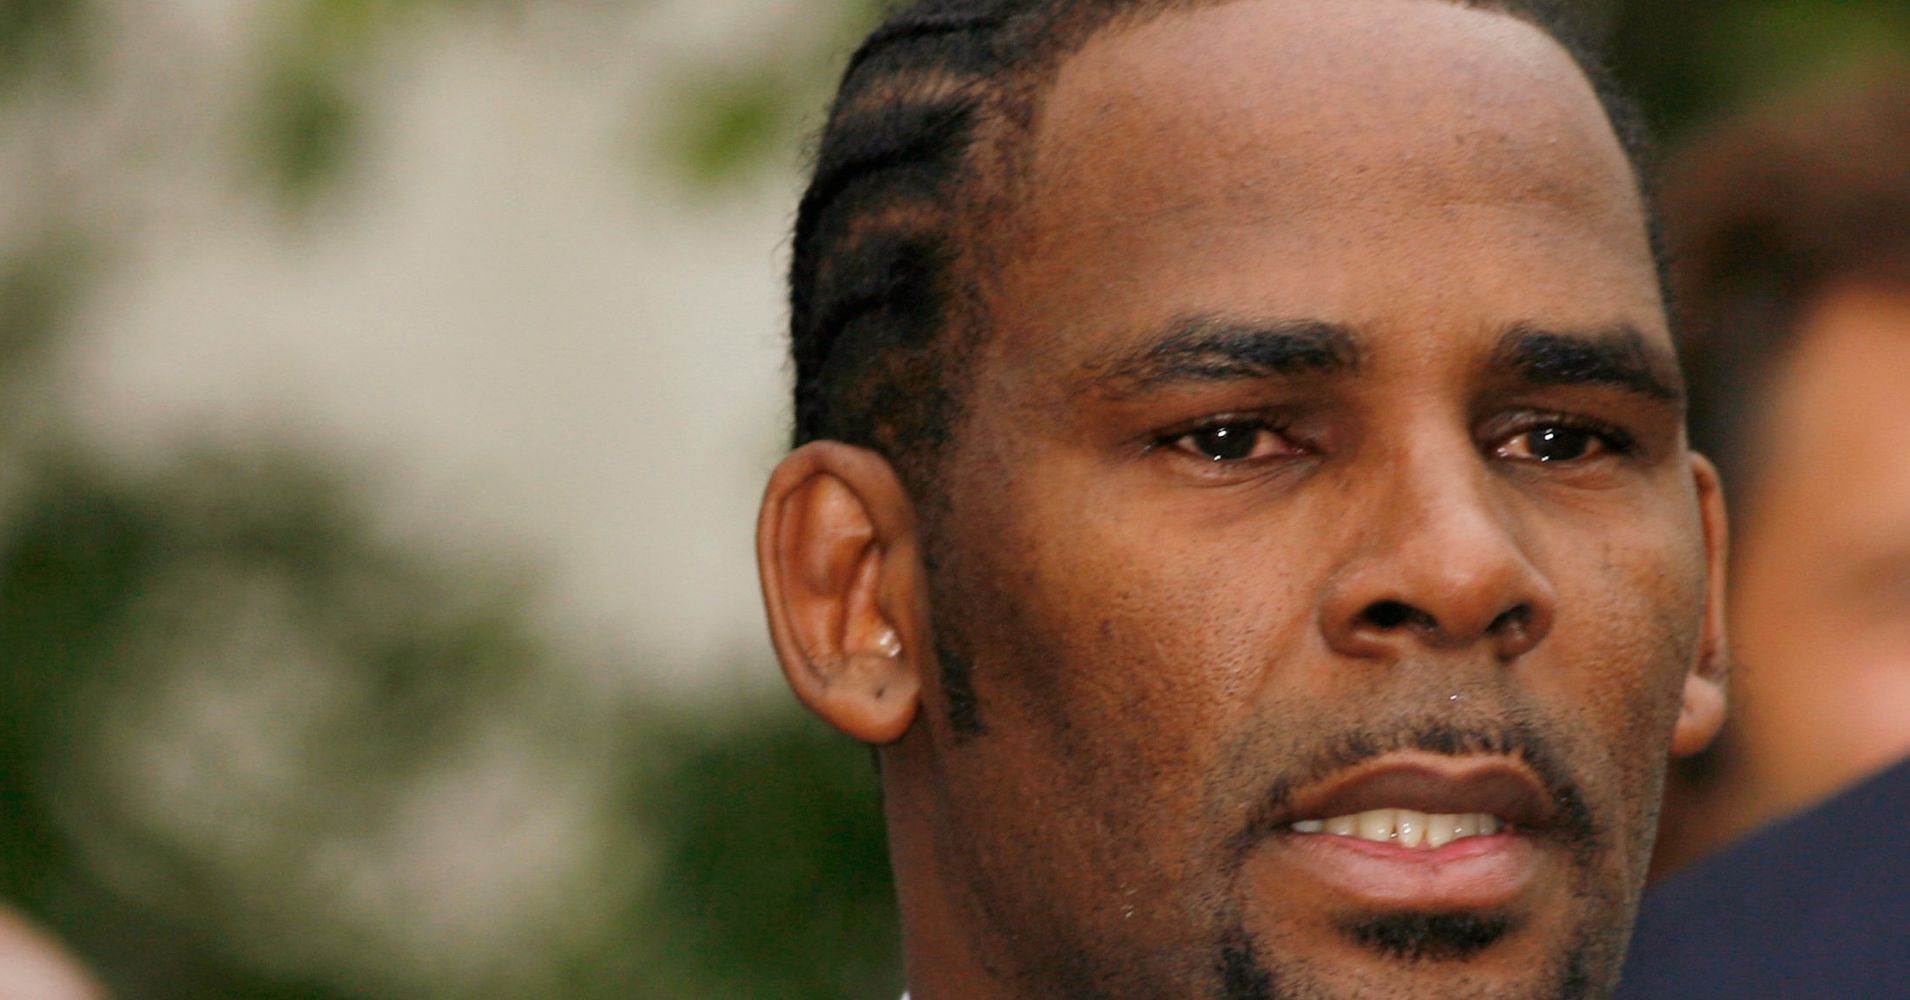 New Accuser Says R Kelly Had Sex With Her When She Was 16 Huffpost